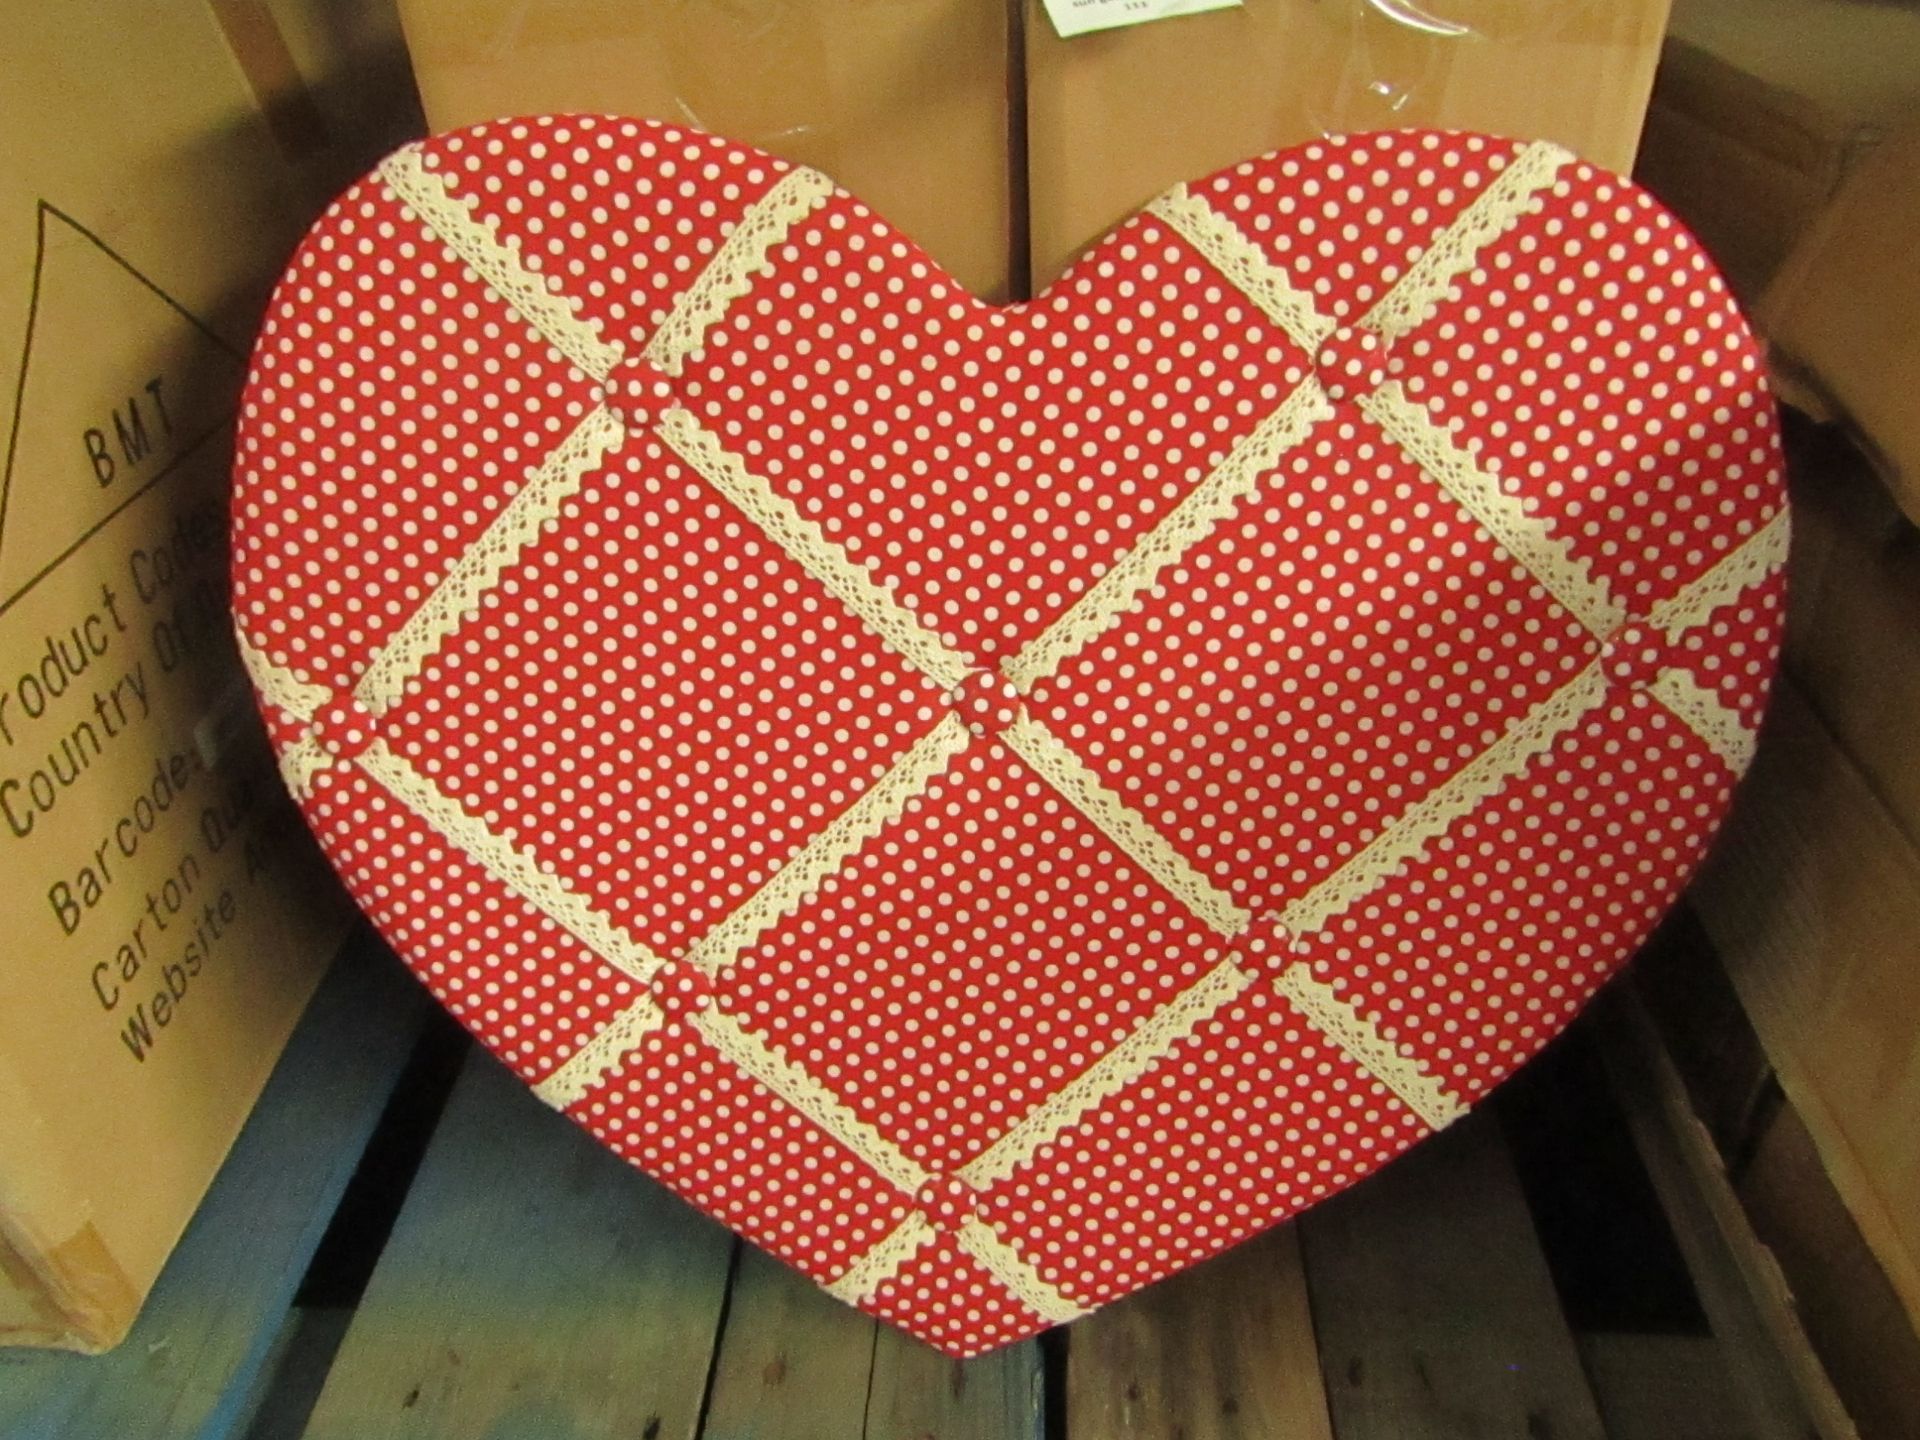 2x Quilted Heart-Shaped Red Memo Board - Unused & Boxed.